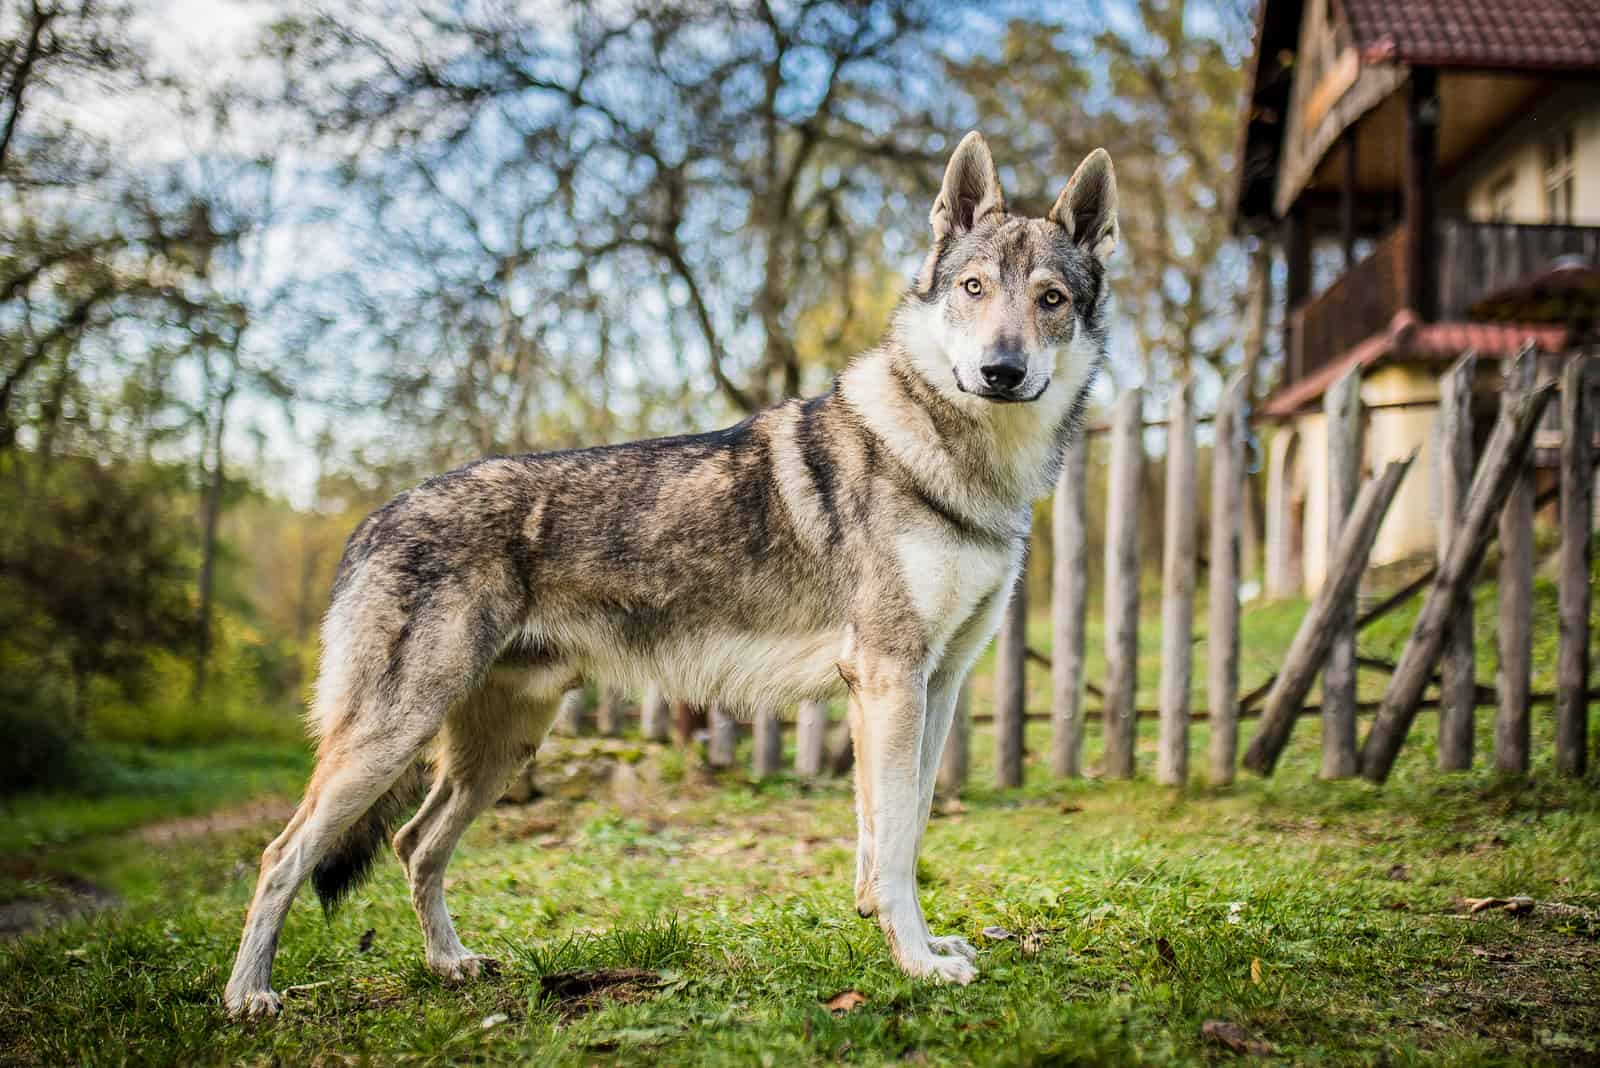 Wolfdog stands in the grass